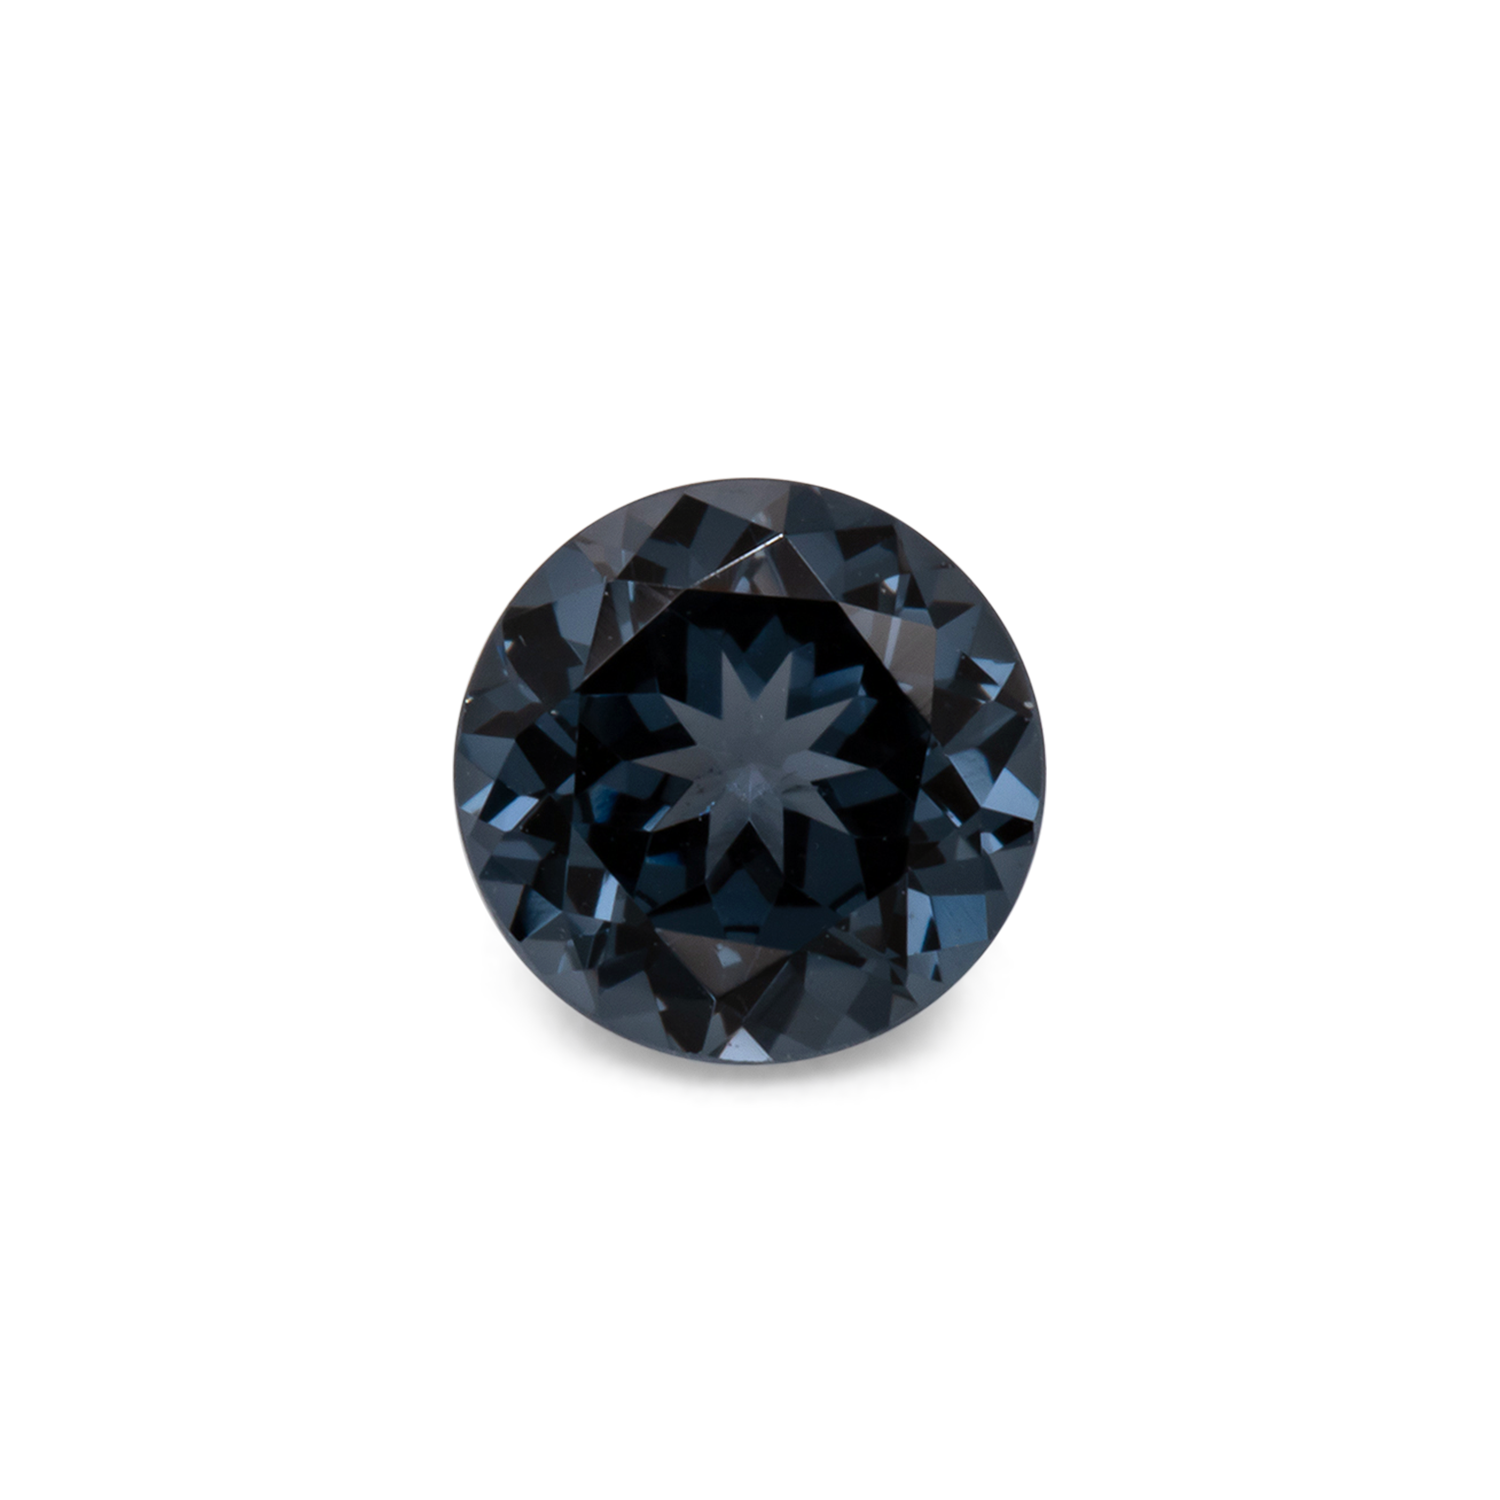 Spinel - grey, round, 5.5x5.5 mm, 0.67 cts, No. SP90050